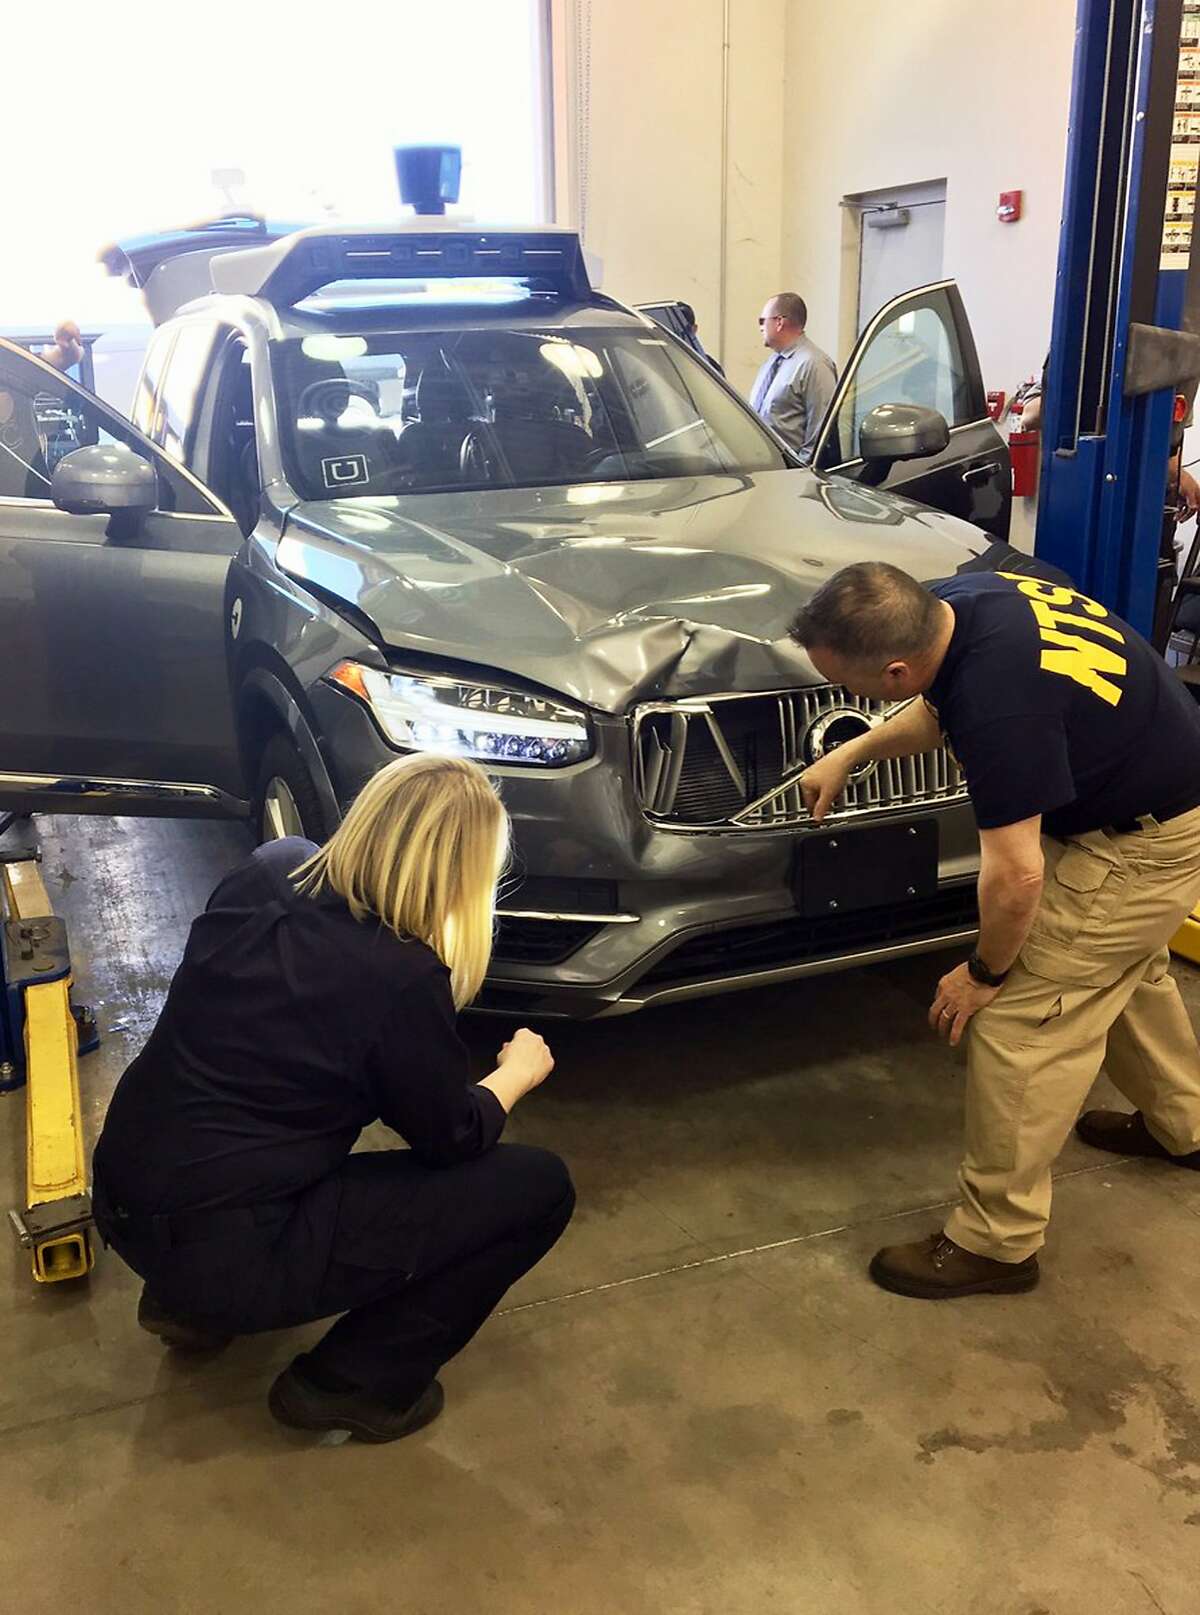 FILE- In this March 20, 2018, file photo provided by the National Transportation Safety Board, investigators examine a driverless Uber SUV that fatally struck a woman in Tempe, Ariz. Uber announced Wednesday, May 23, that it is pulling its self-driving cars out of Arizona, a reversal triggered by the recent death of woman who was run over by one of the ride-hailing service's robotic vehicles while crossing a darkened street in a Phoenix suburb. (National Transportation Safety Board via AP, File)